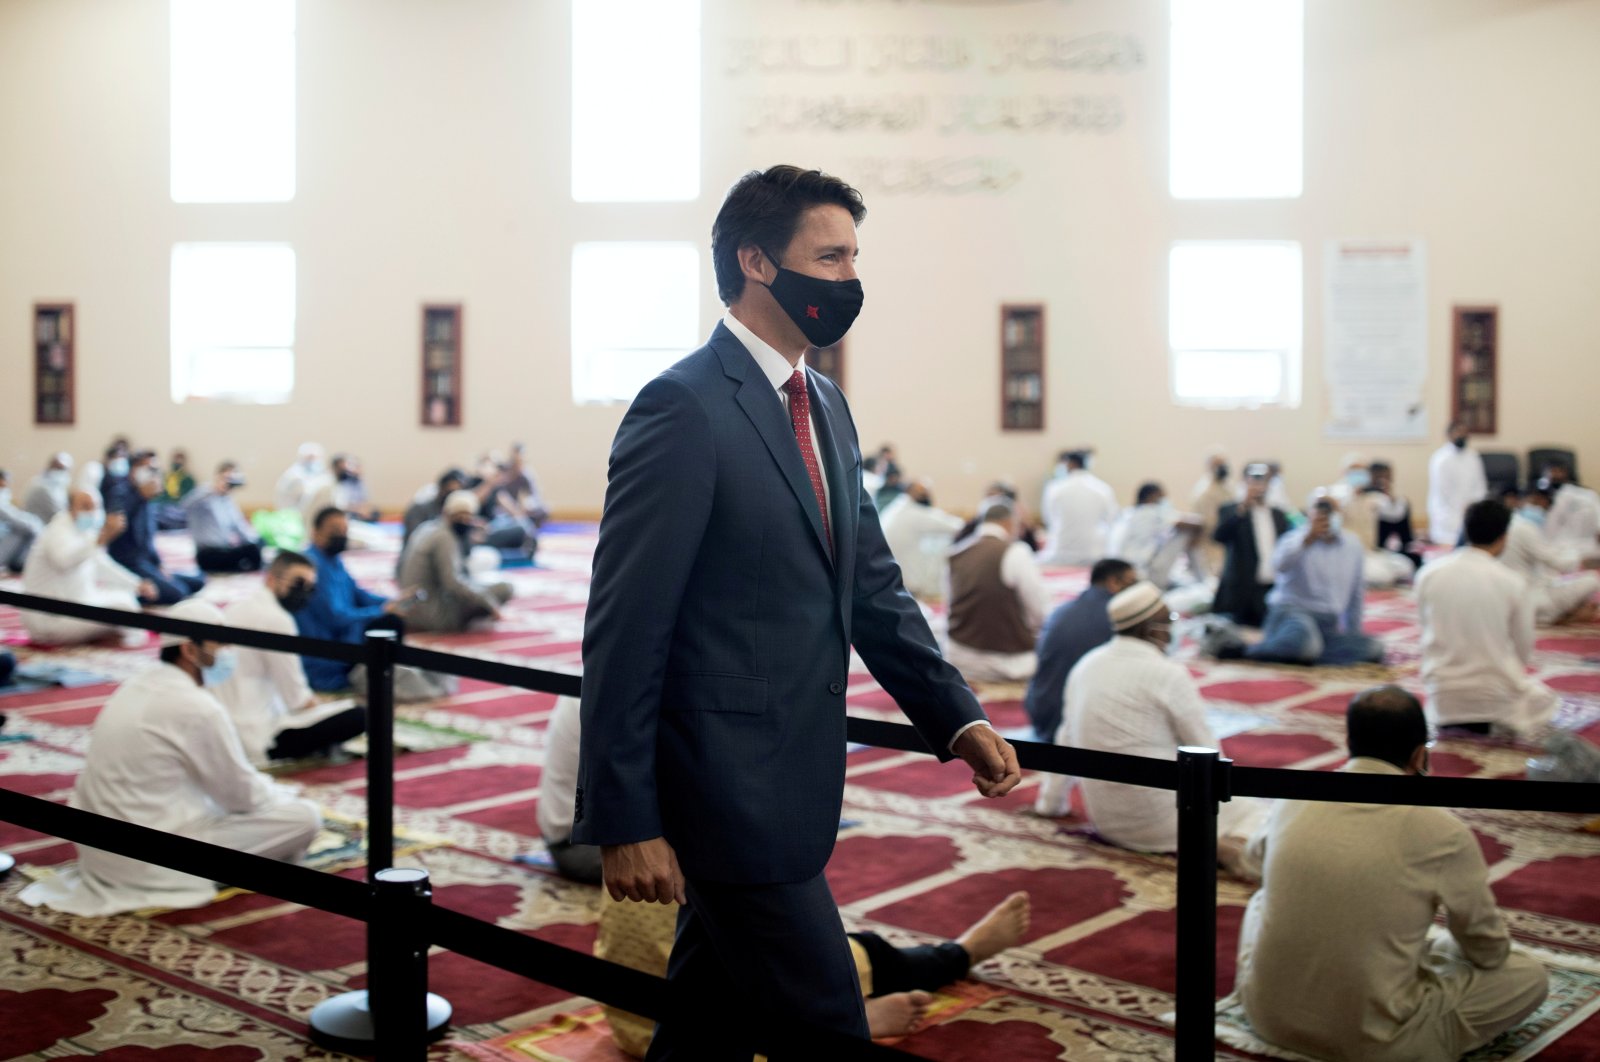 Canada&#039;s Prime Minister Justin Trudeau visits the Hamilton Mountain Mosque at the start of Eid in Hamilton, Ontario, Canada, July 20, 2021. (Reuters File Photo)